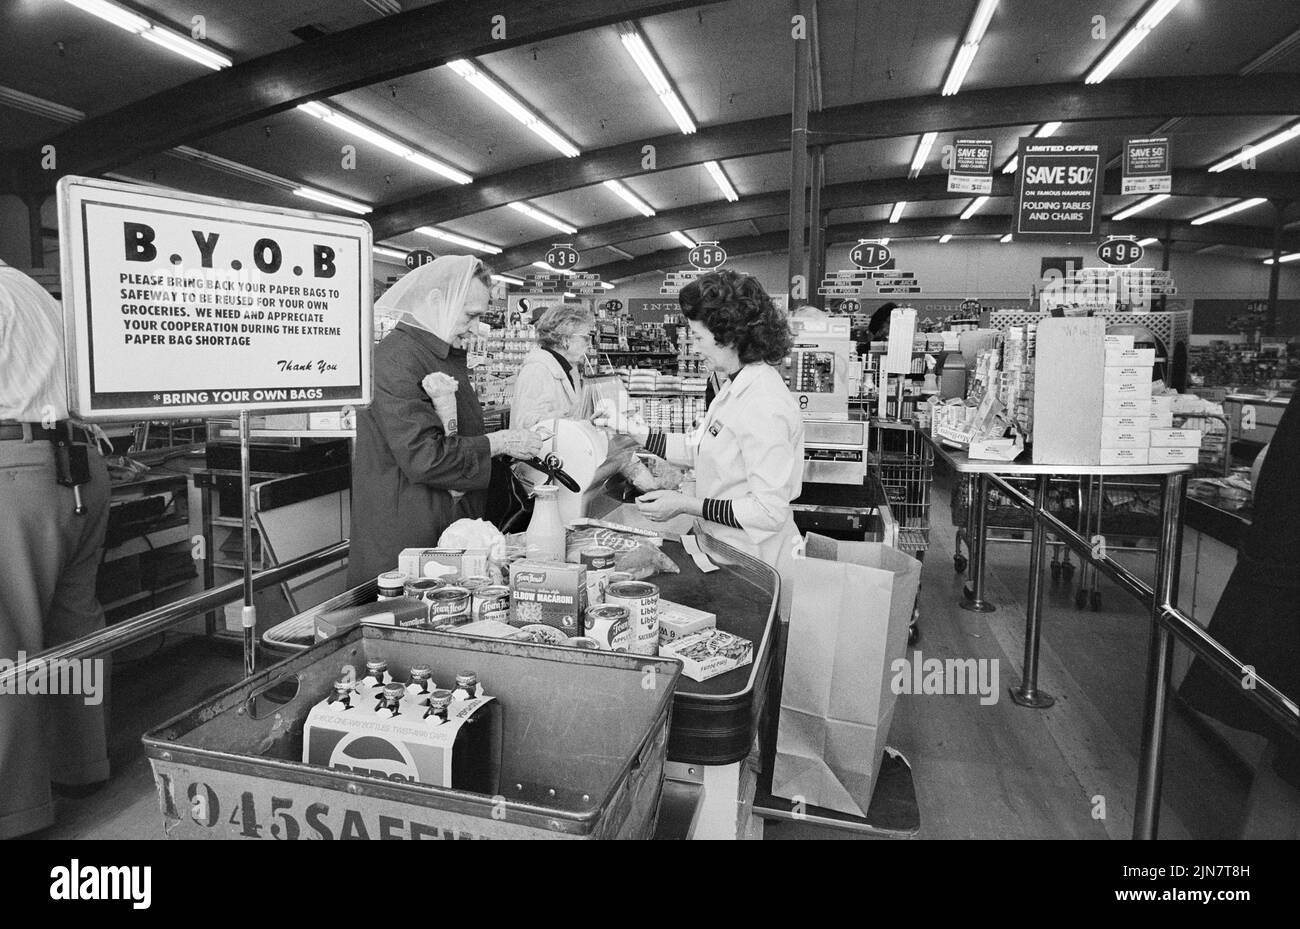 Grocery store signs about shopping bags, Marion S. Trikosko, U.S. News & World Report Magazine Photograph Collection, February 1974 Stock Photo